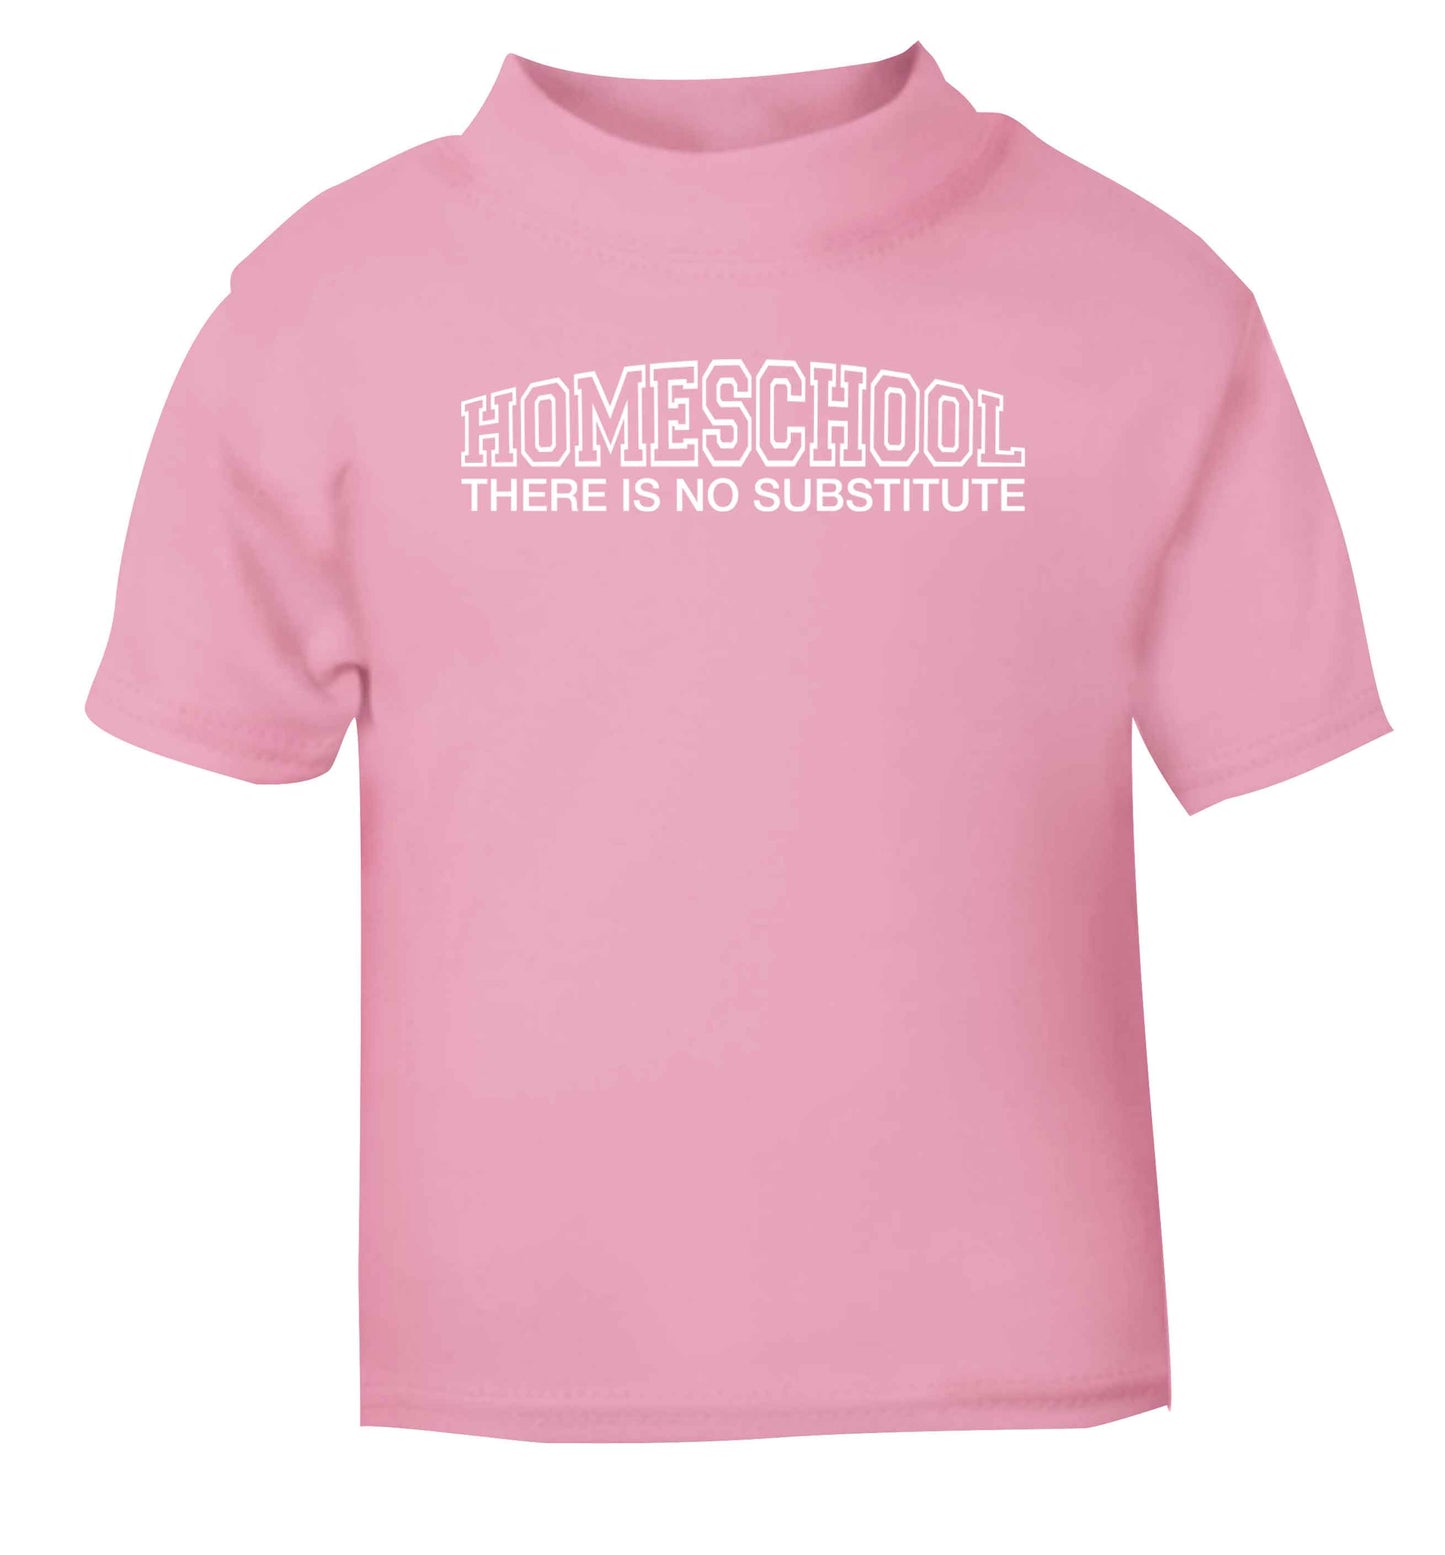 Homeschool there is not substitute light pink Baby Toddler Tshirt 2 Years